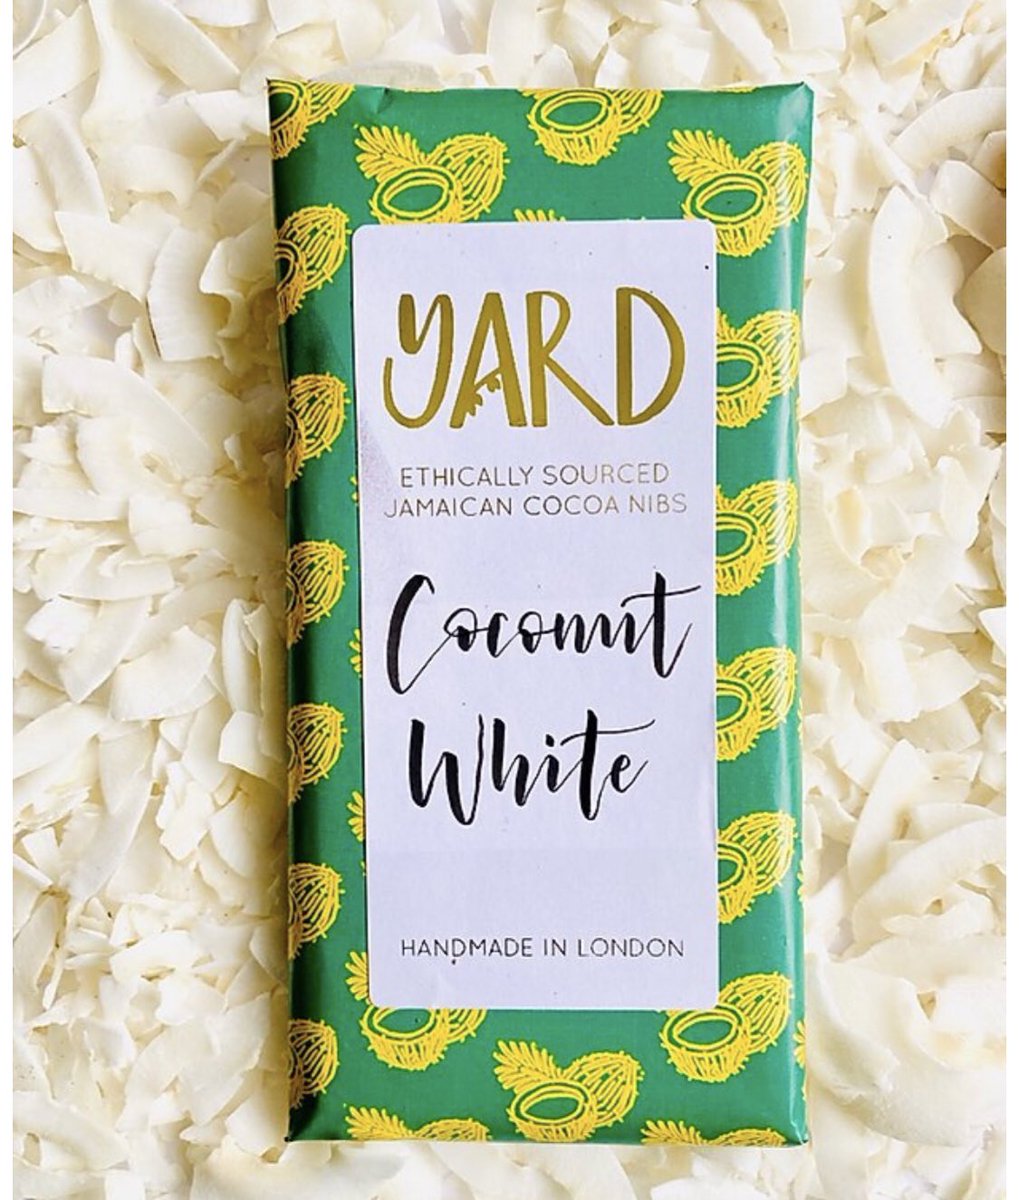 Looking for a BLACK, WOMEN-LED luxury chocolate company?Check out @yardconfectionery on Instagram & order some ethically-sourced Jamaican cocoa nibs!  https://www.yardconfectionery.com 